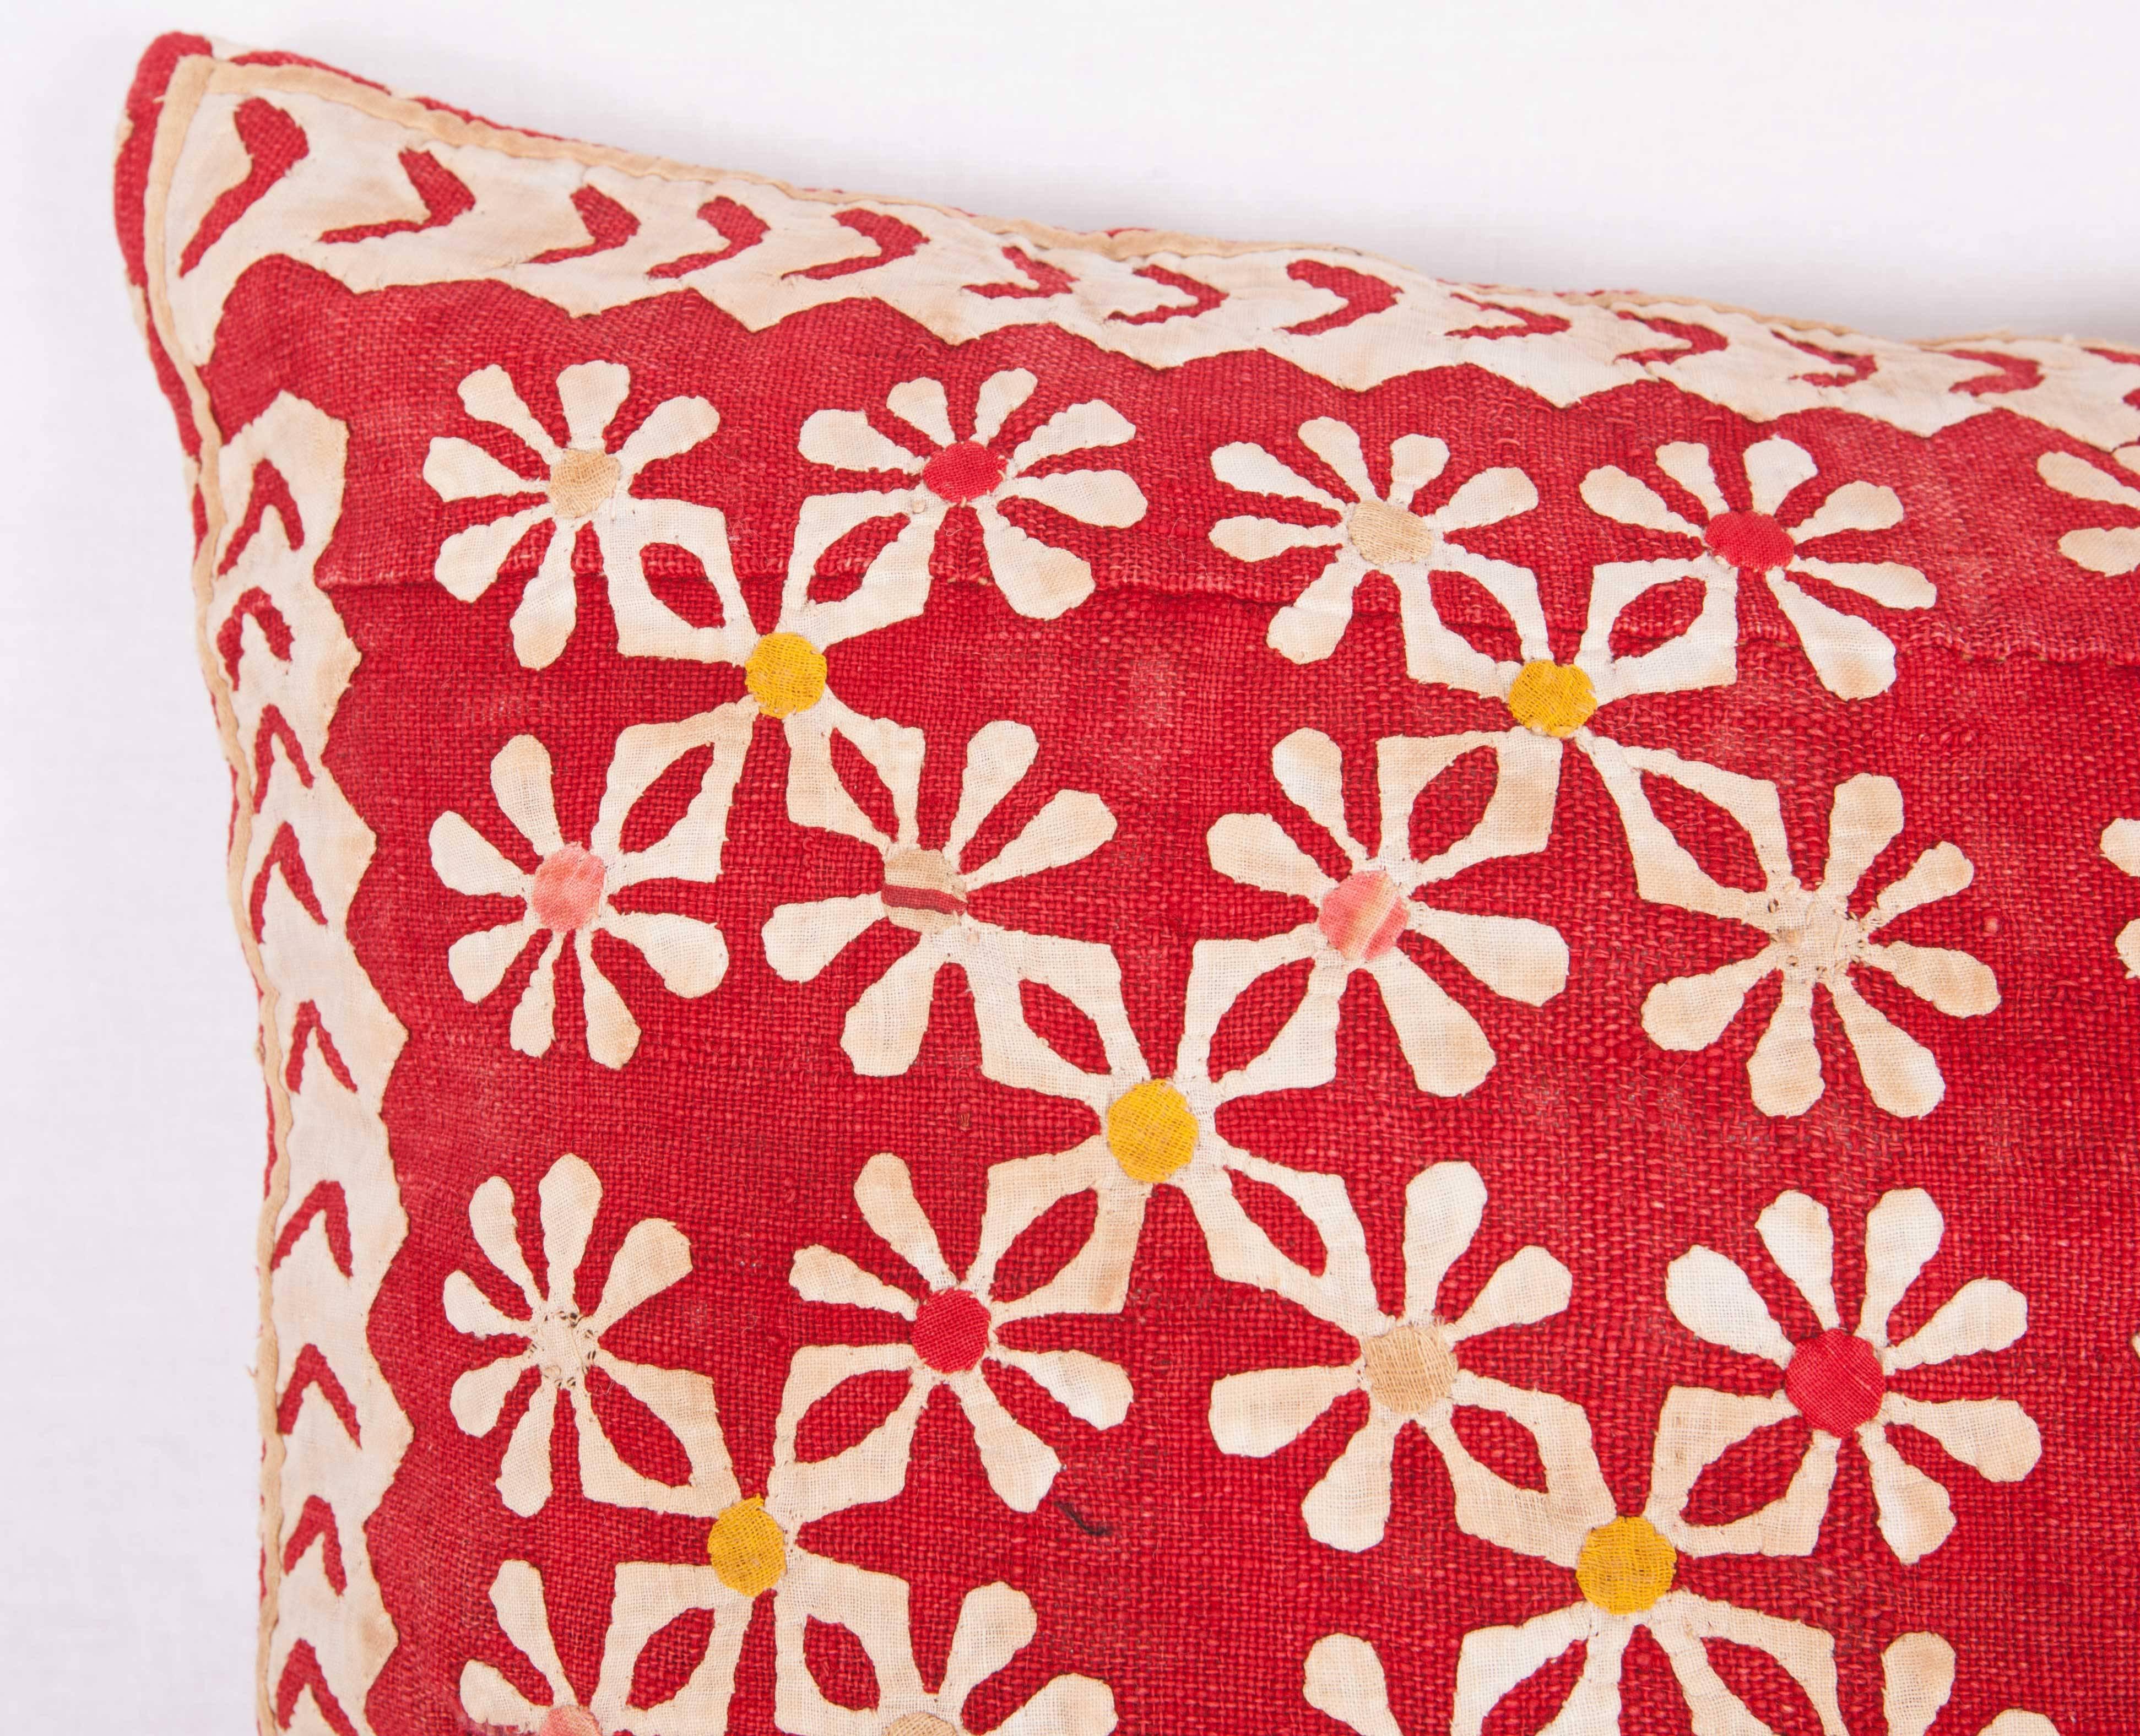 The pillow case is made from an early 20th century Indian applique panel. It does not come with an insert but comes with a bag made to the size and out of cotton to accommodate the filling. The backing is made of linen. Please note filling is not